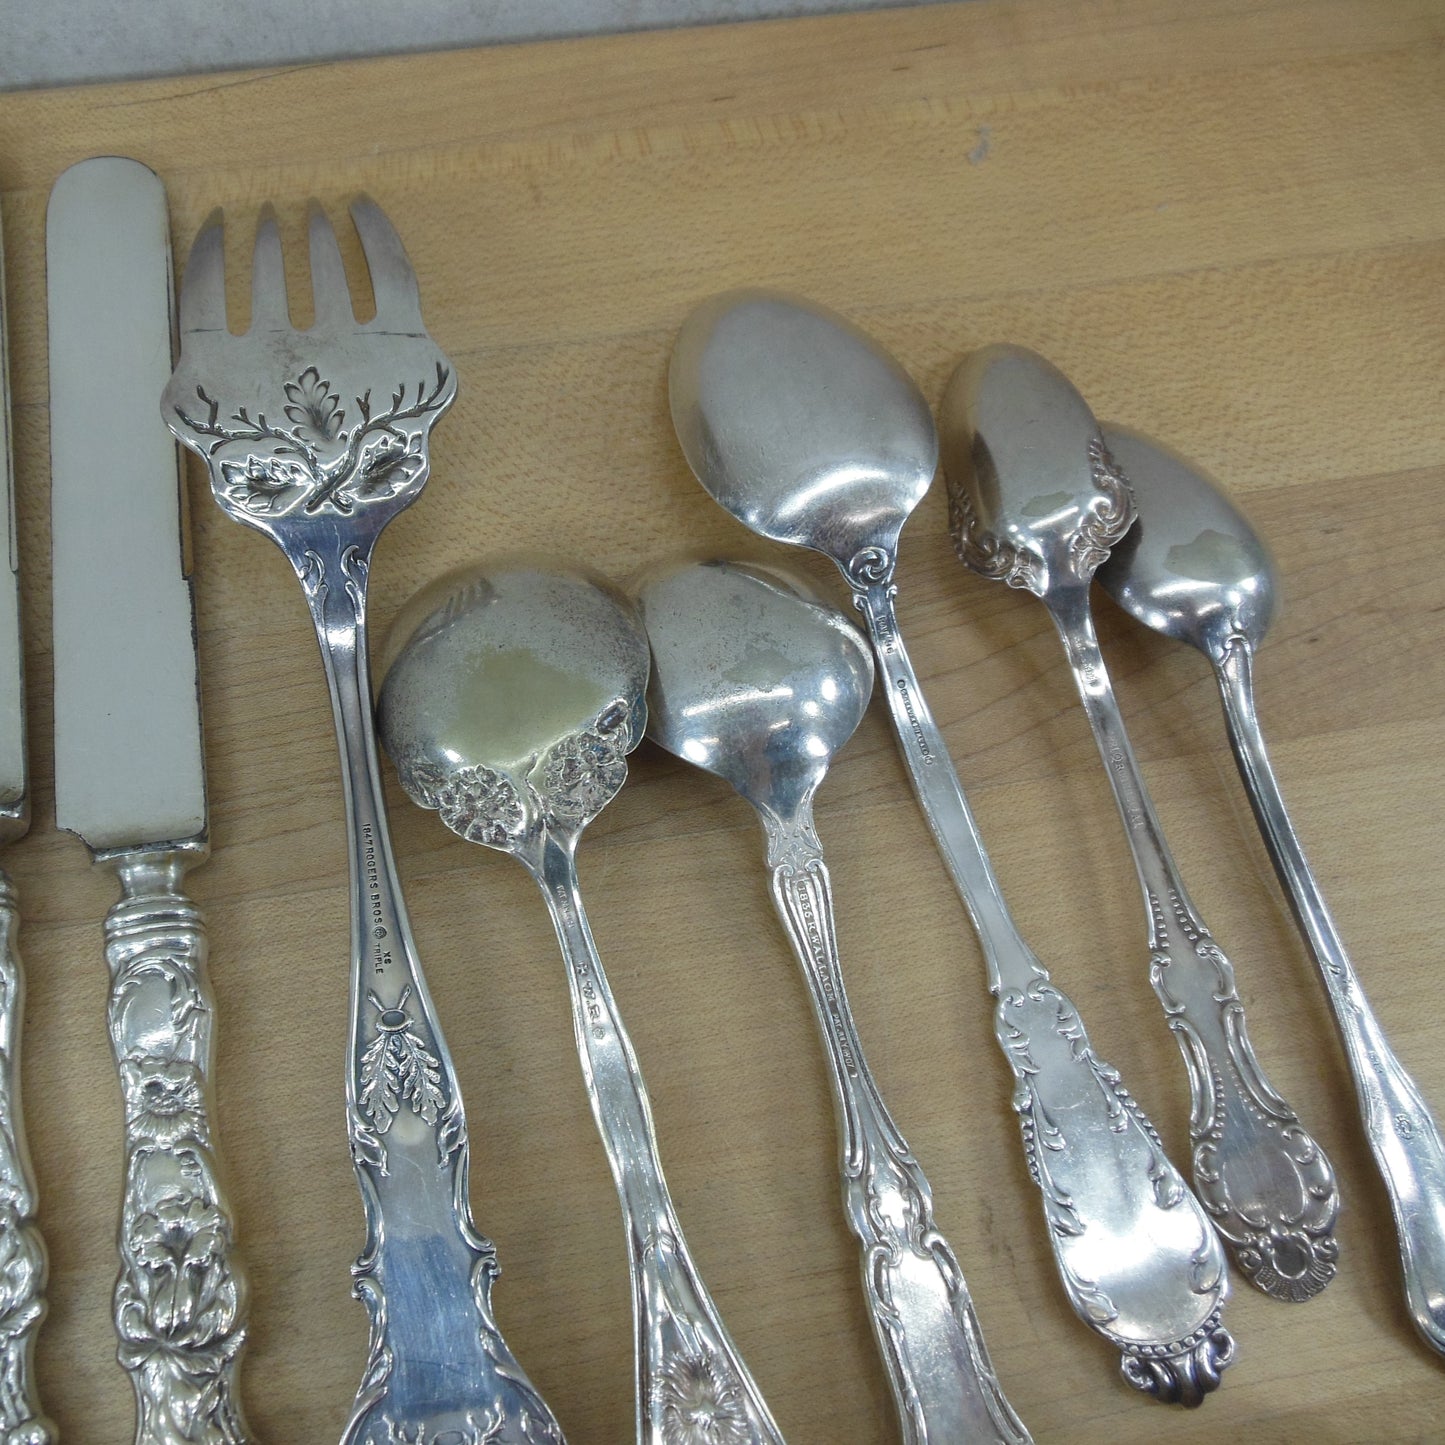 Mixed Lot Silverplate Flatware 27 Lot - Ornate Flowers & Other - Discounted Craft knives